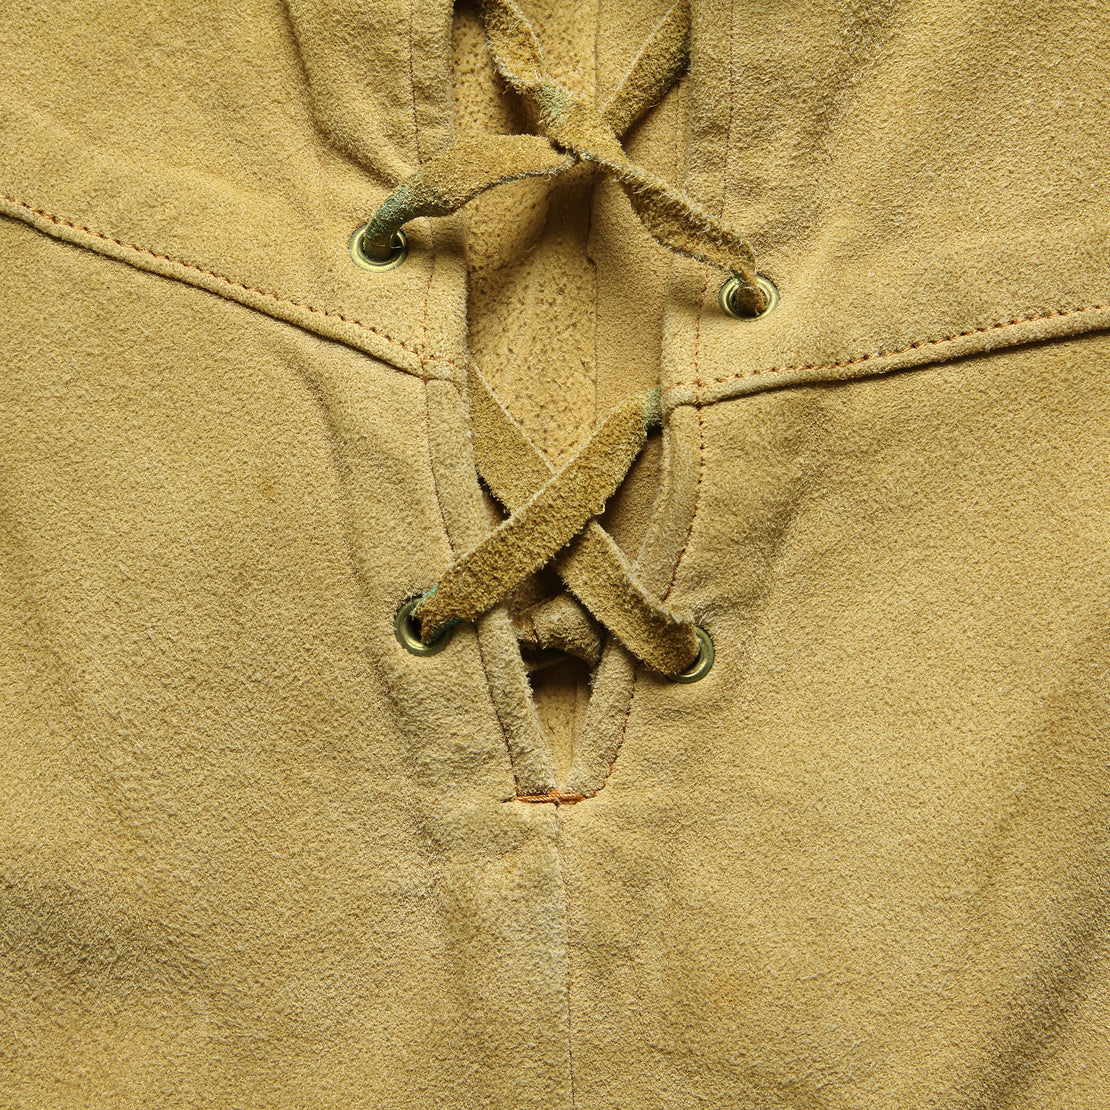 1950s Deerskin Lace-Up Overshirt - Tan Suede - Vintage - STAG Provisions - W - Tops - L/S Woven - Overshirt